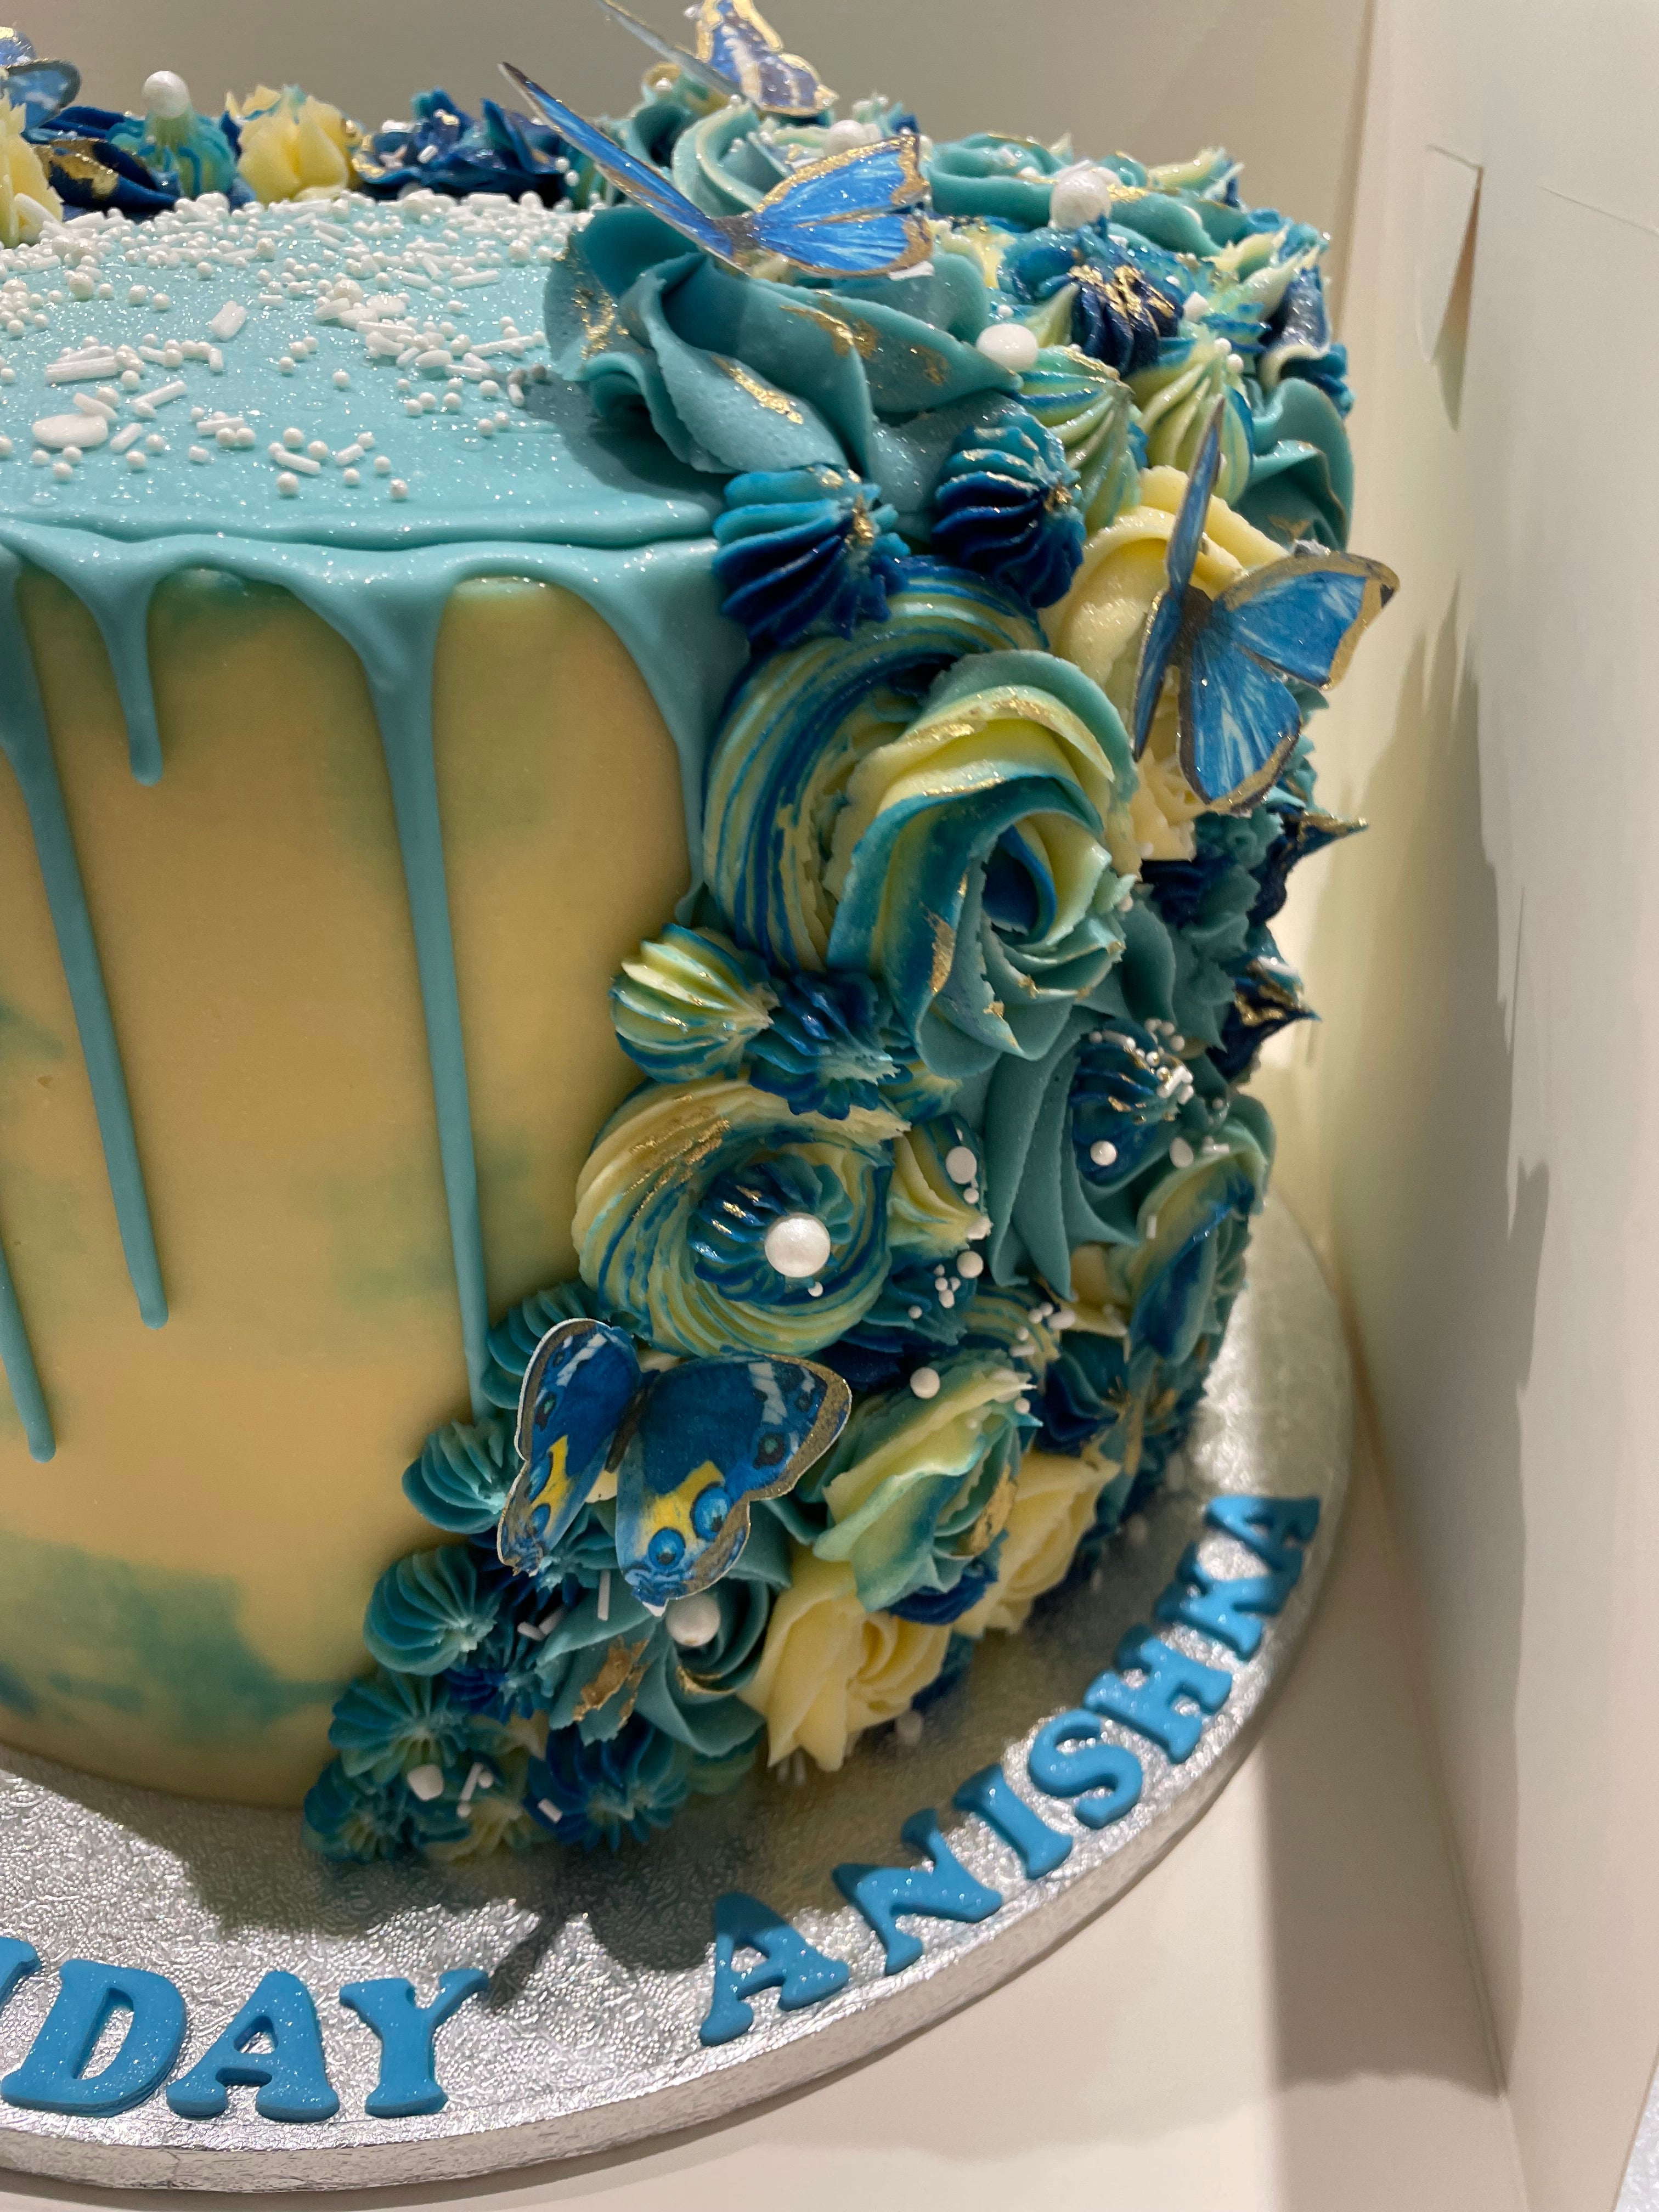 BUTTERLY FLORAL DRIP OCCASION CAKE